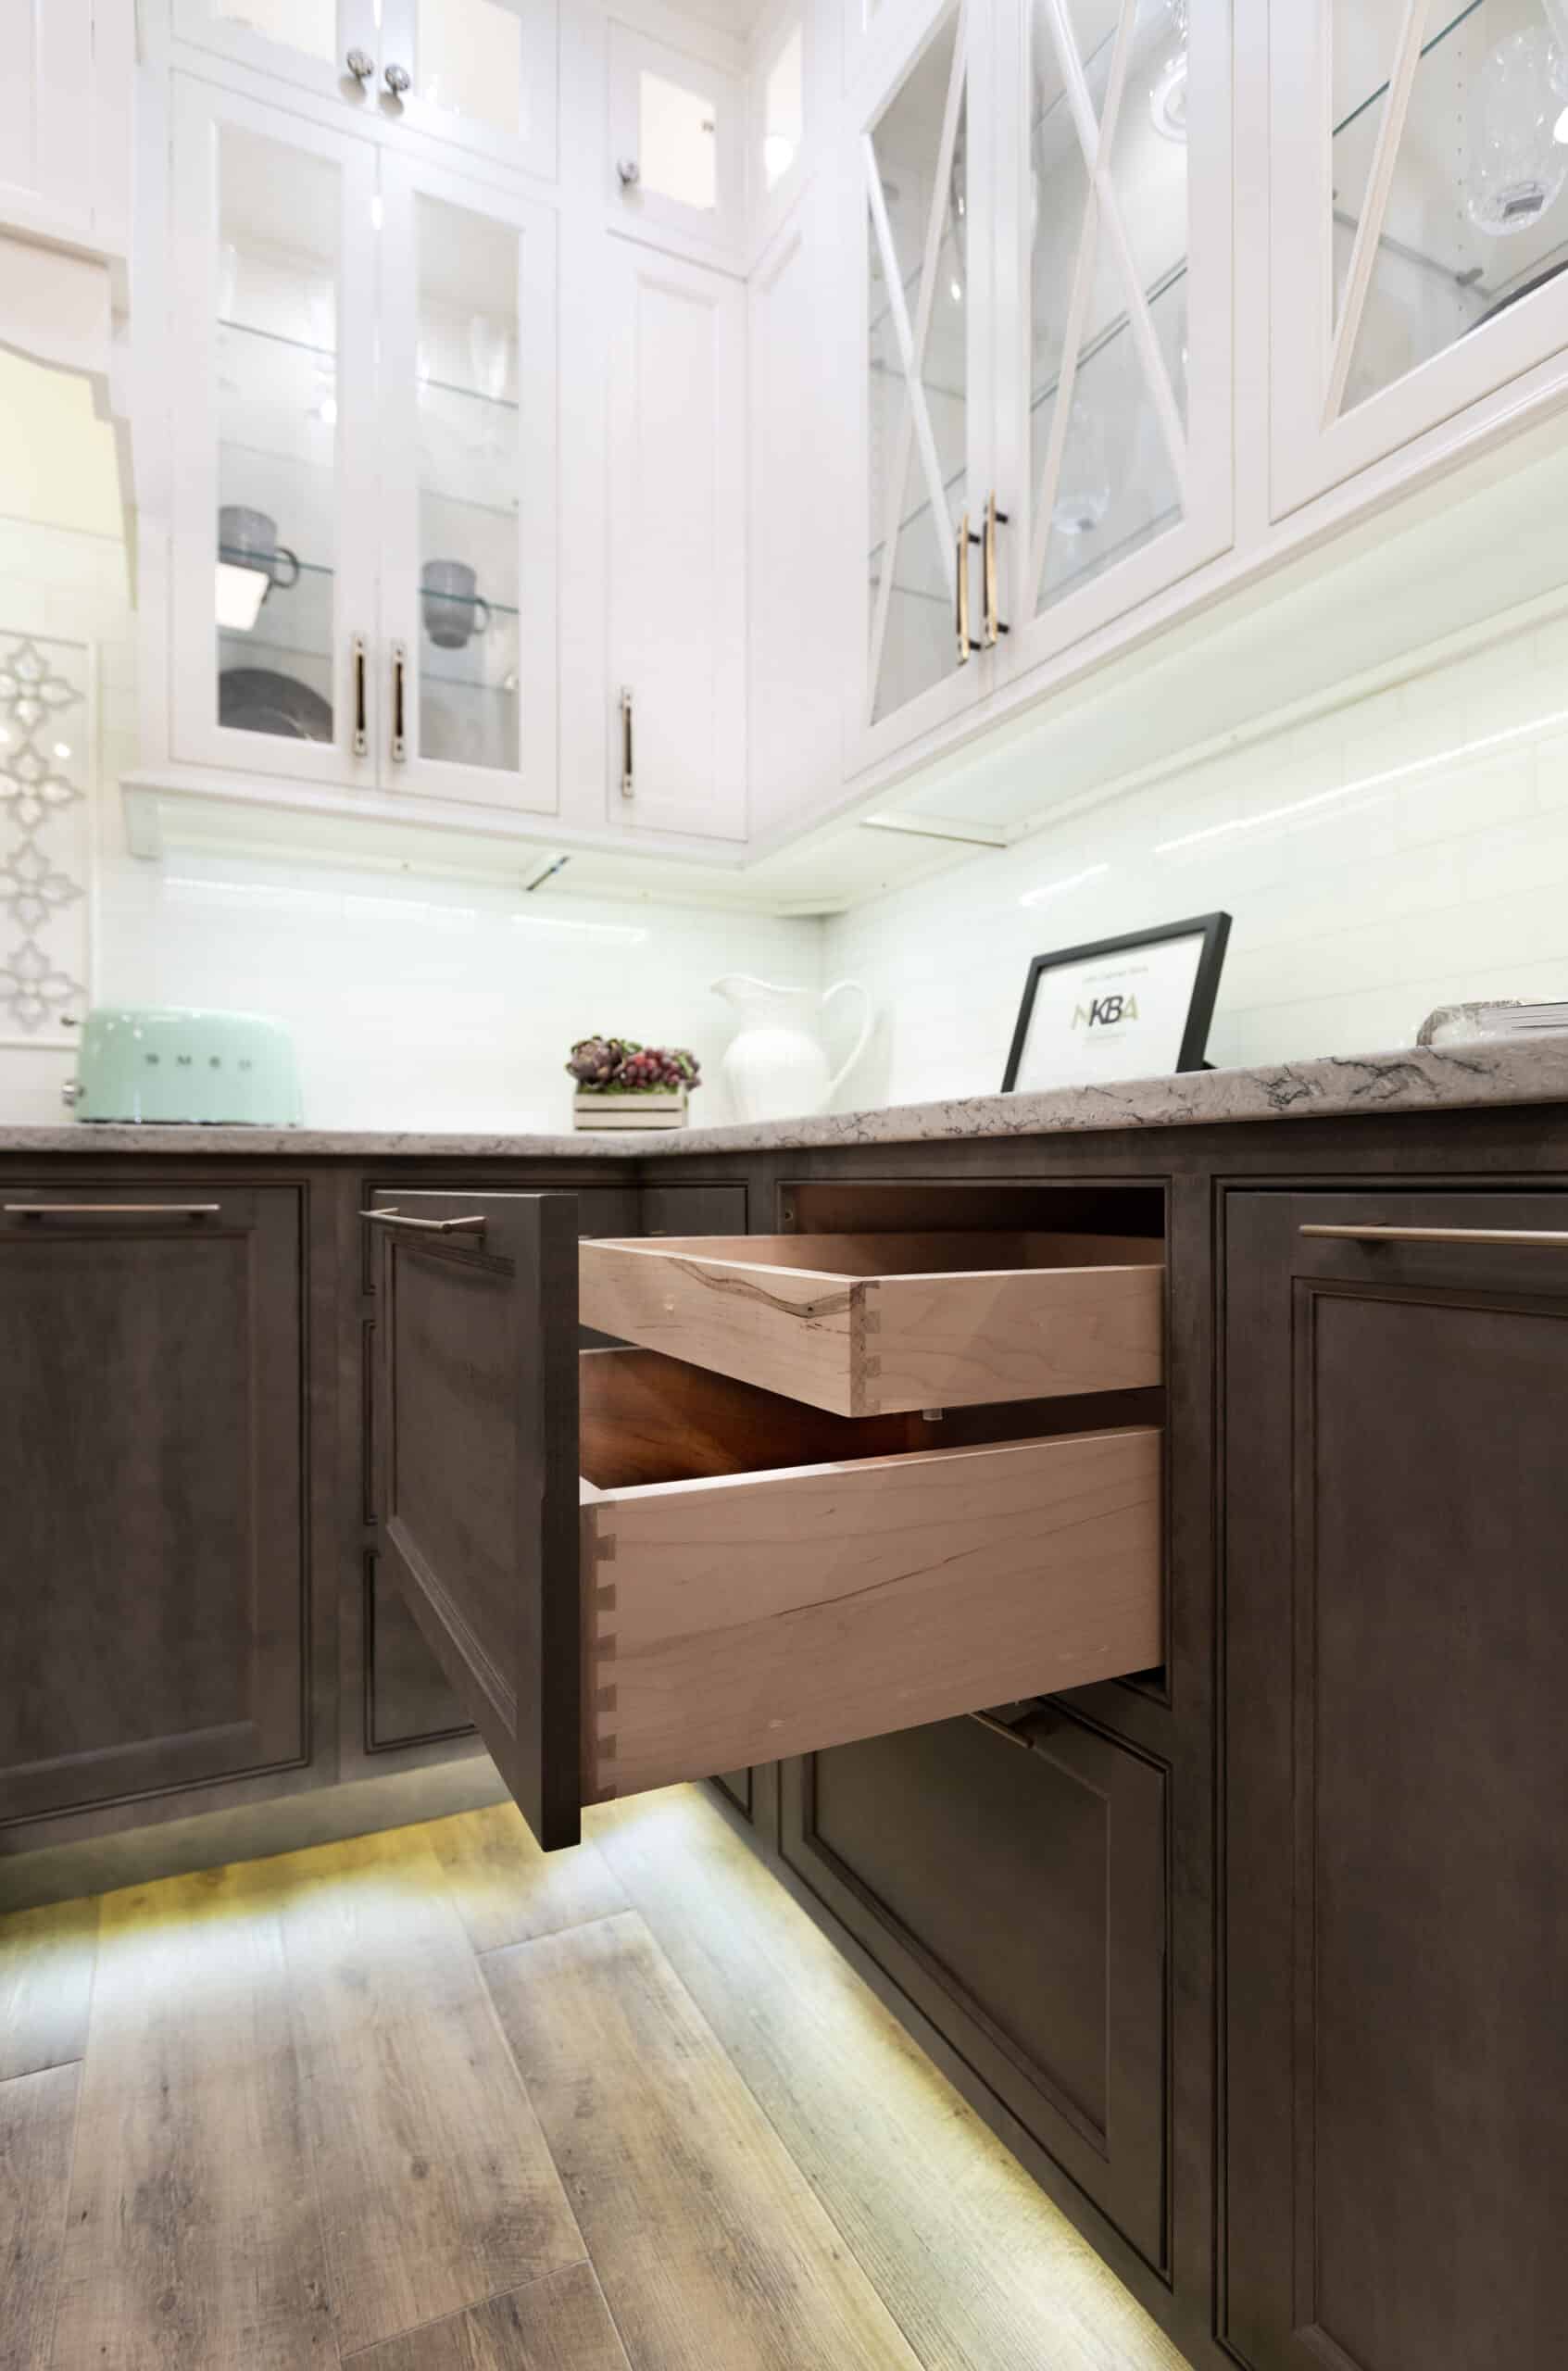 A well-lit kitchen with a convenient pull-out drawer